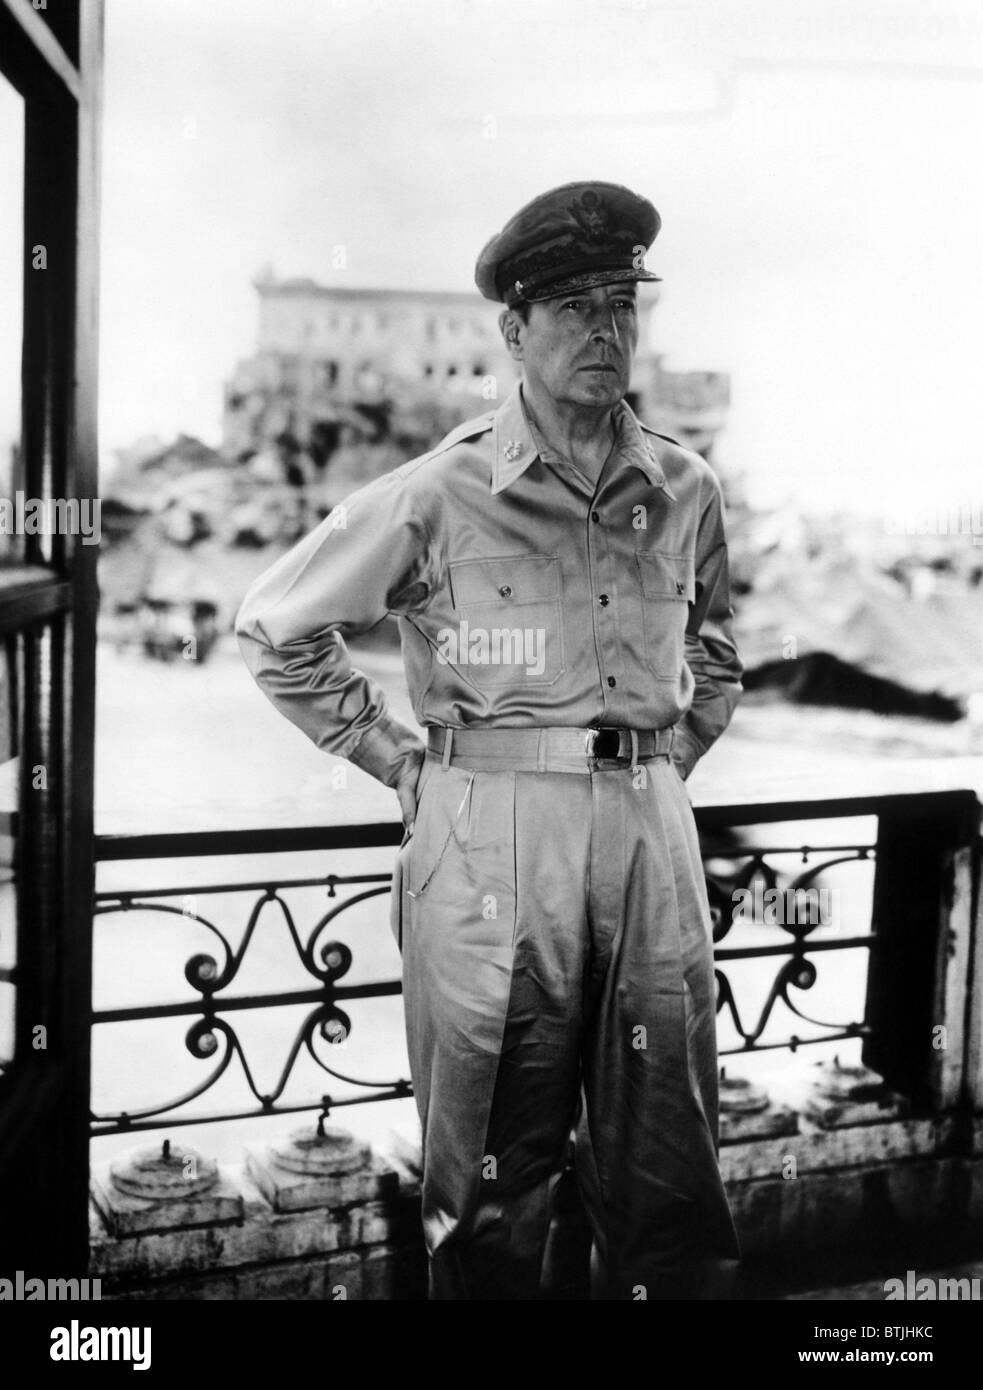 General Douglas MacArthur, Supreme Allied Commander (1880-1964), South West Pacific Theater, c. 1942 Stockfoto